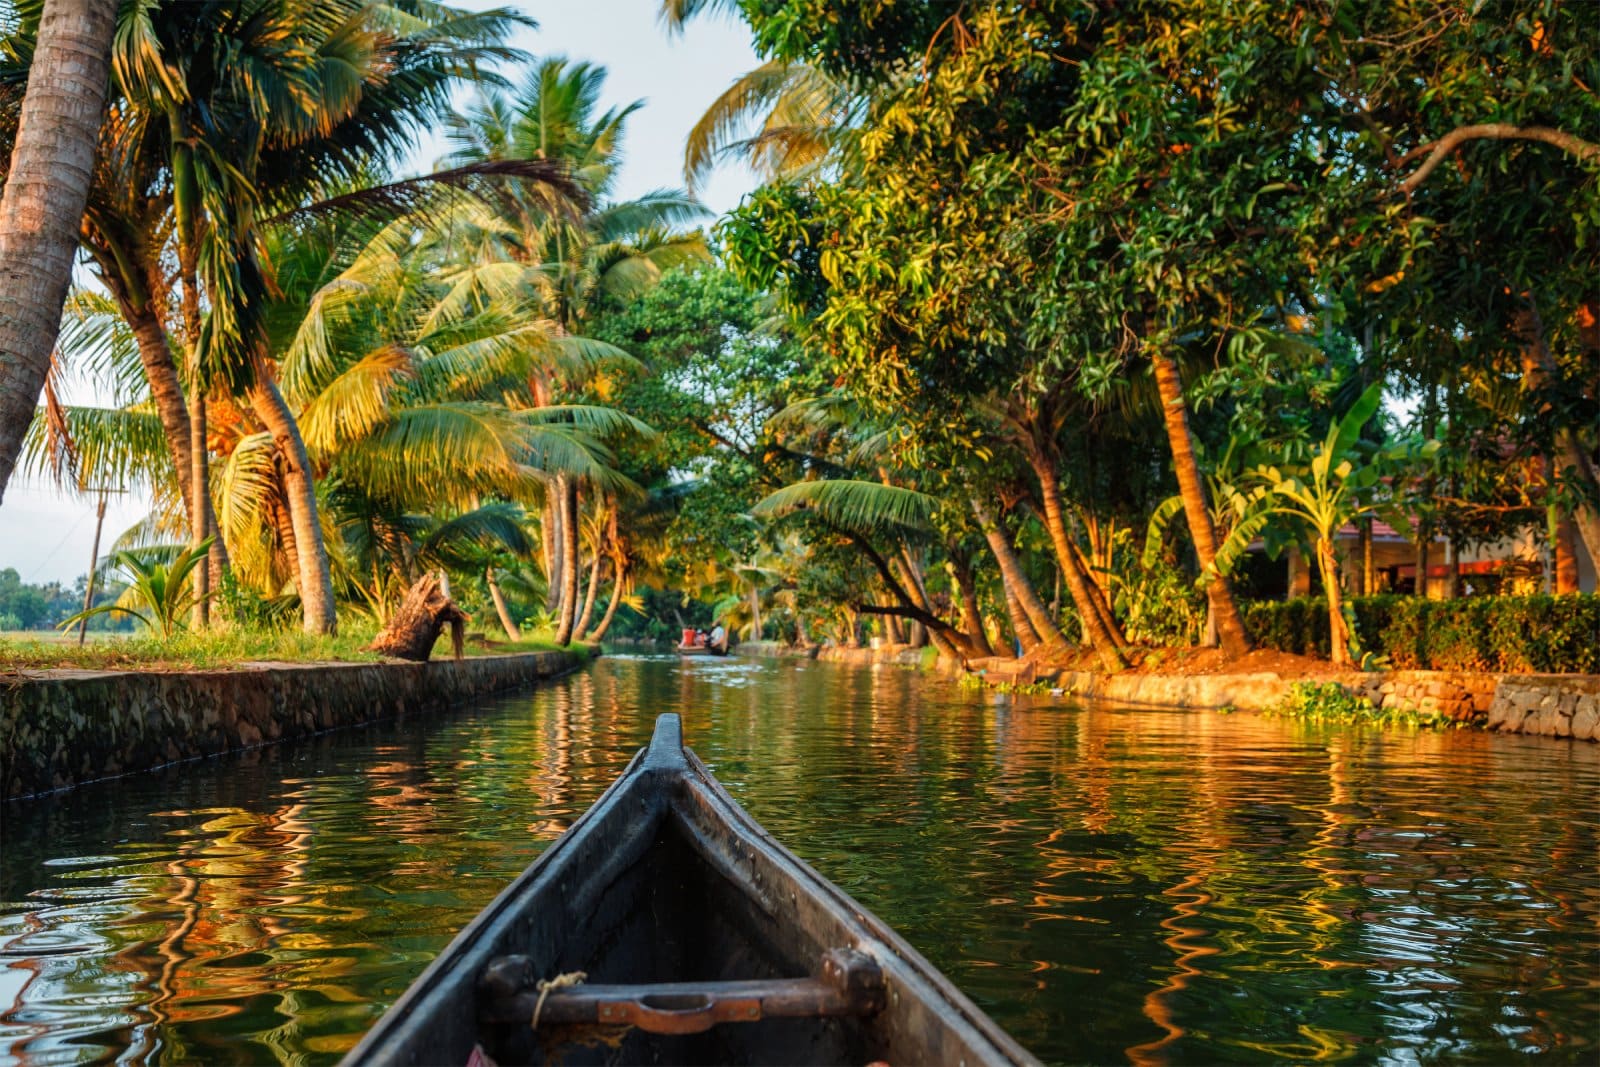 Image Credit: Shutterstock / Dmitry Rukhlenko <p>Kerala’s backwaters are an example of eco-tourism done right, with solar-powered houseboats and organic spice farms. This destination allows travelers to experience India’s rich culture without breaking the bank.</p>